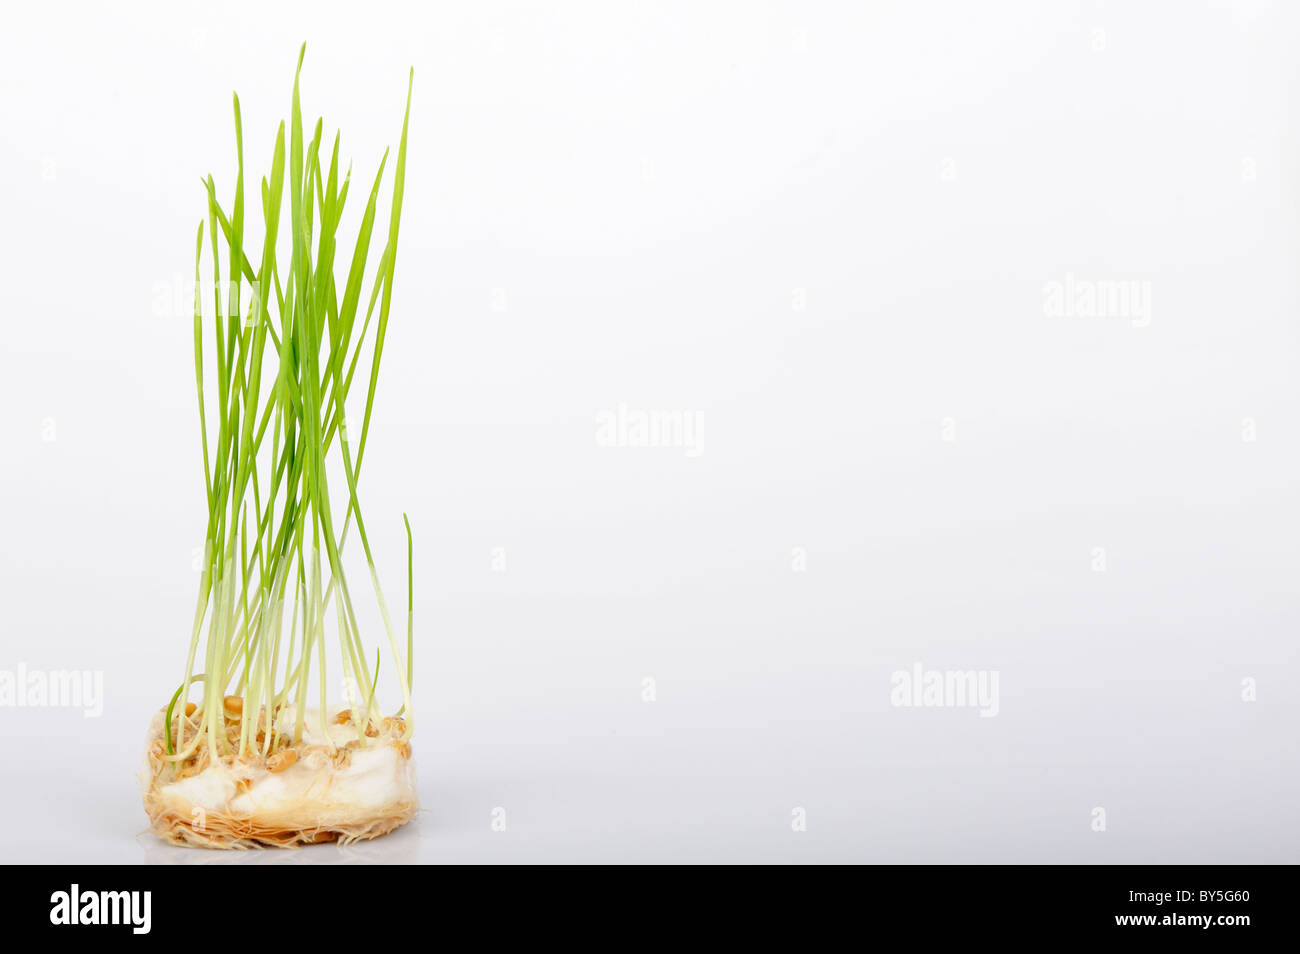 Stock photo of wheat seeds germinating on a bed of cotton wool. Stock Photo